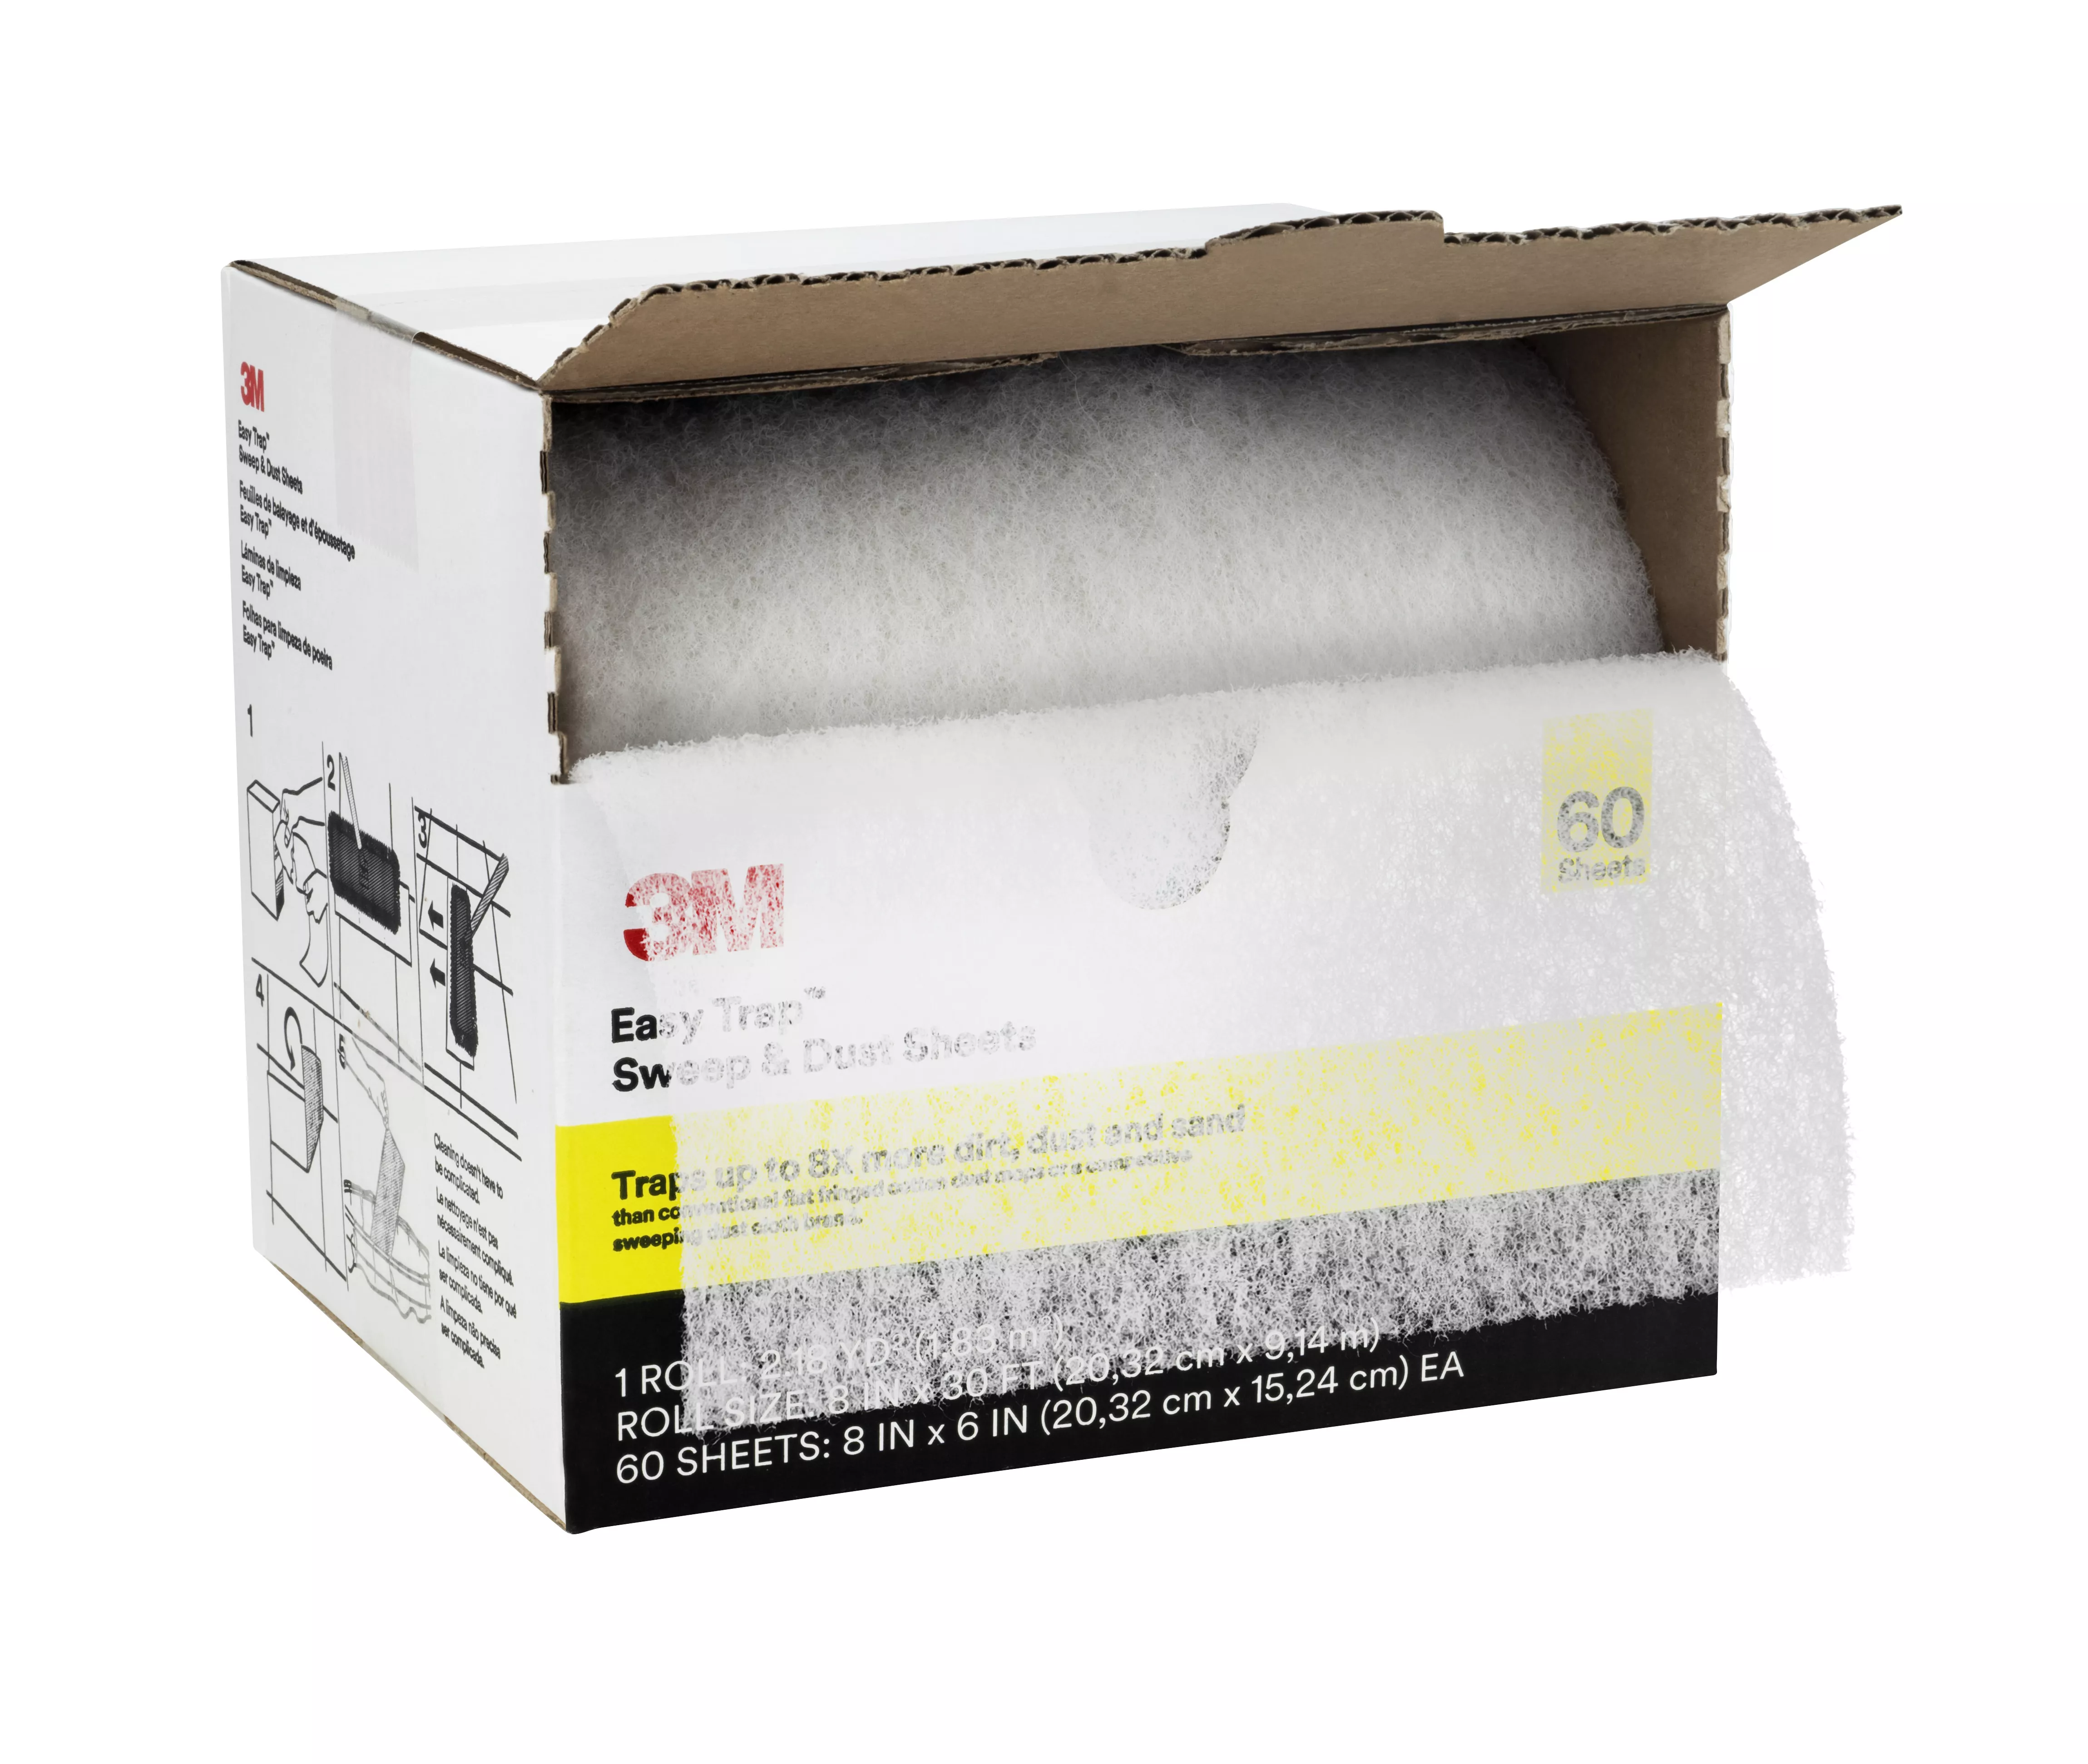 3M™ Easy Trap™ Sweep & Dust Sheets, 8 in x 6 in, 60 Sheets/Roll, 8
Rolls/Case